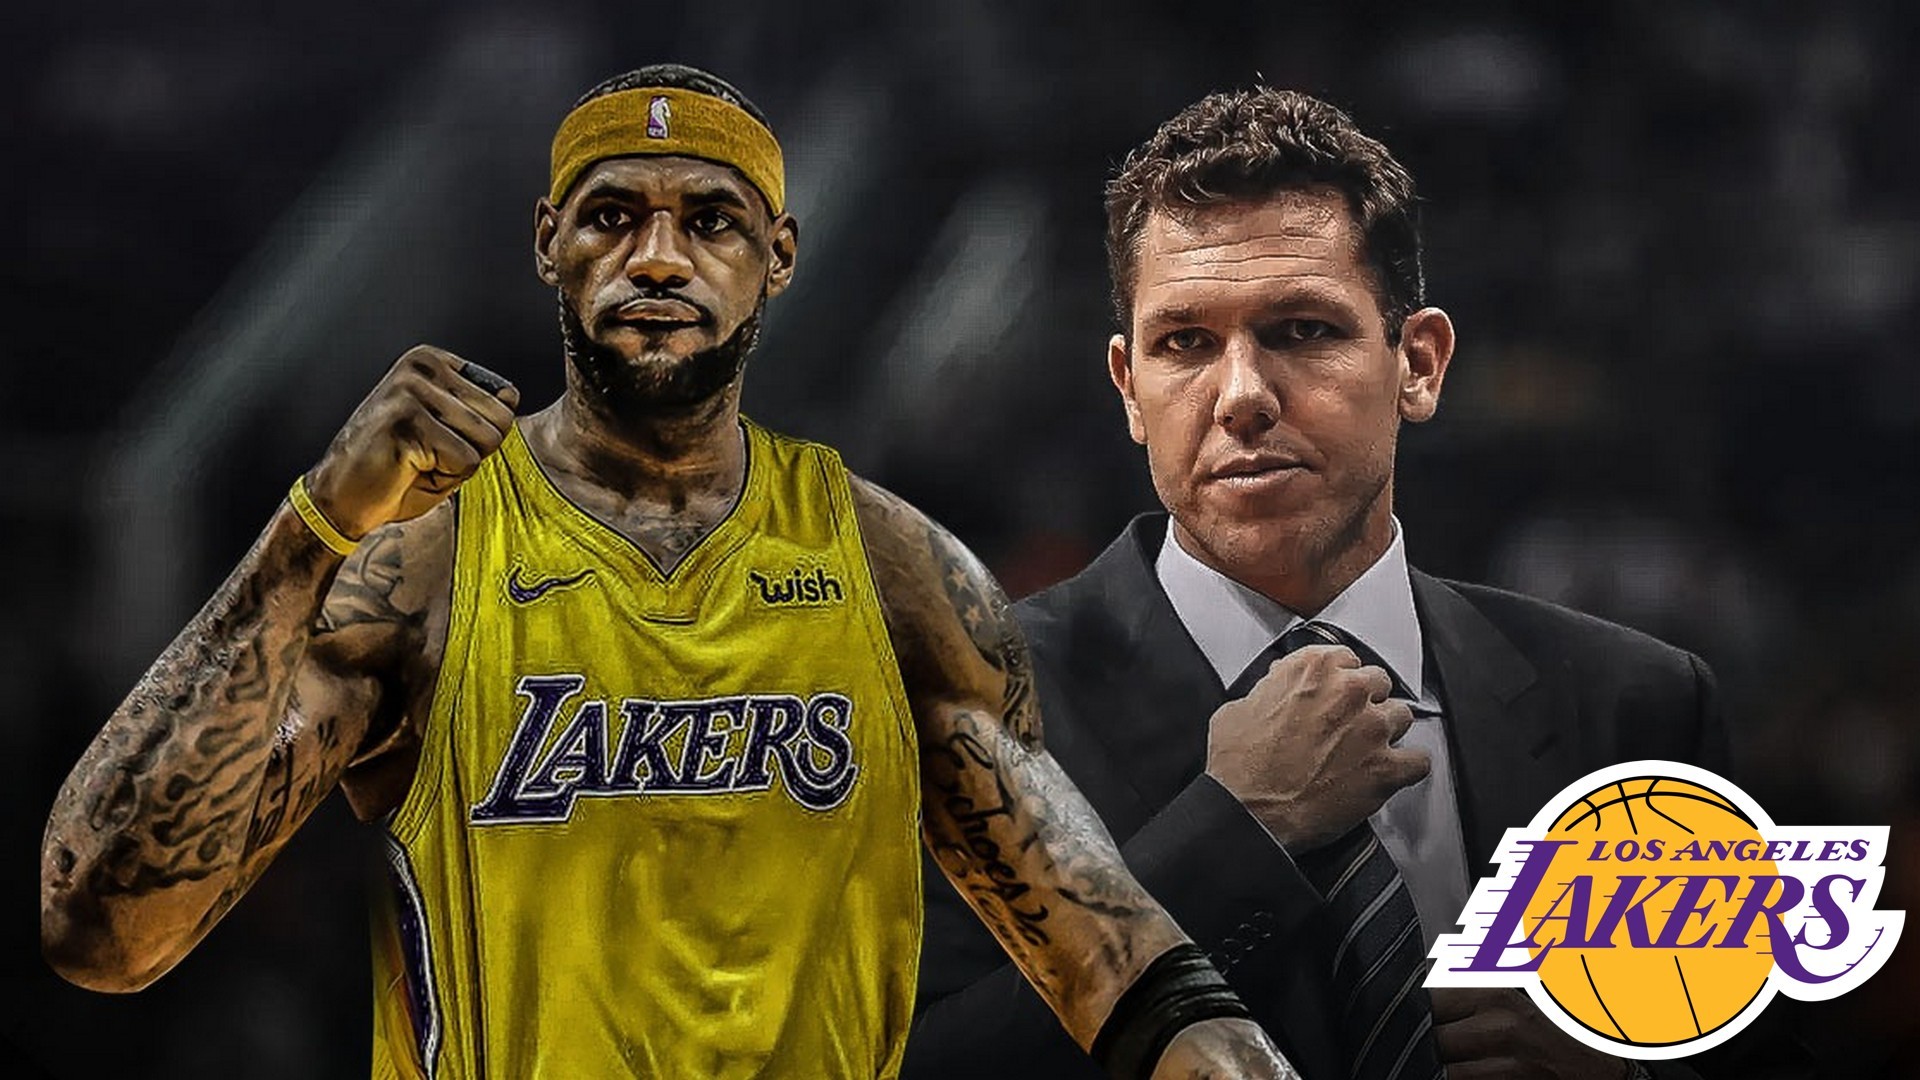 1920x1080 LeBron James LA Lakers Wallpaper HD with image dimensions  pixel.  You can make this